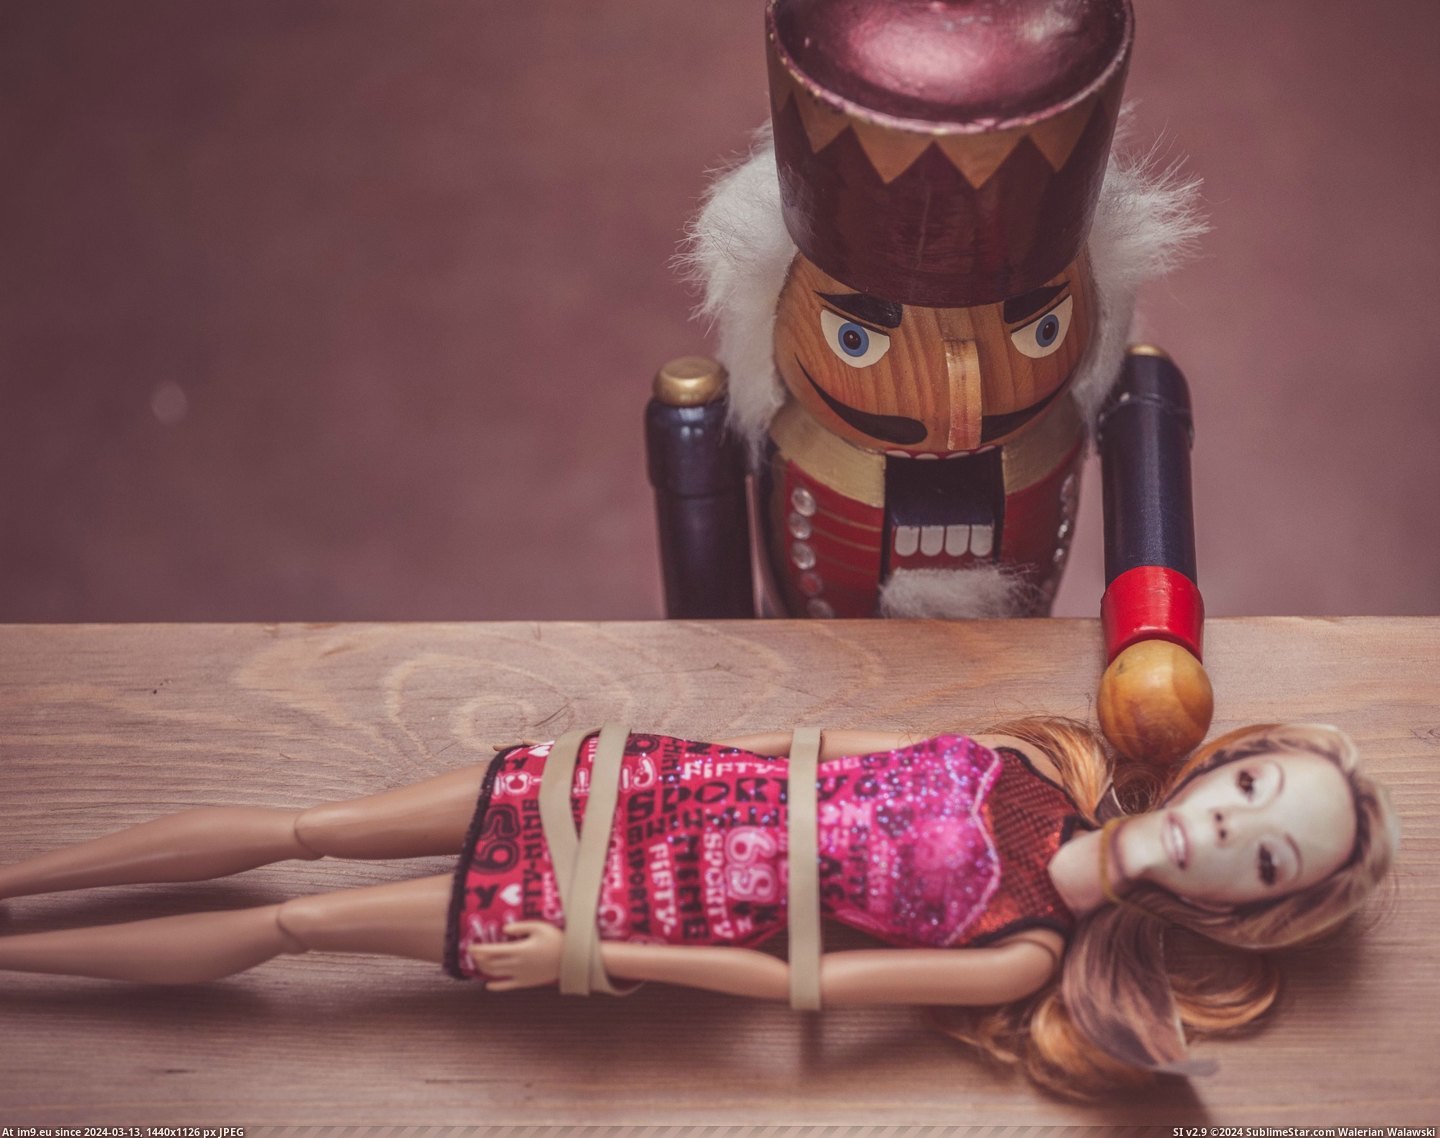 #For #Year #Friend #Stole #Nutcracker #Amazing #Christmas #Got [Pics] Last Christmas I stole my friend's nutcracker - this year, he got these back: 'most amazing thing anyone has done for me  Pic. (Bild von album My r/PICS favs))